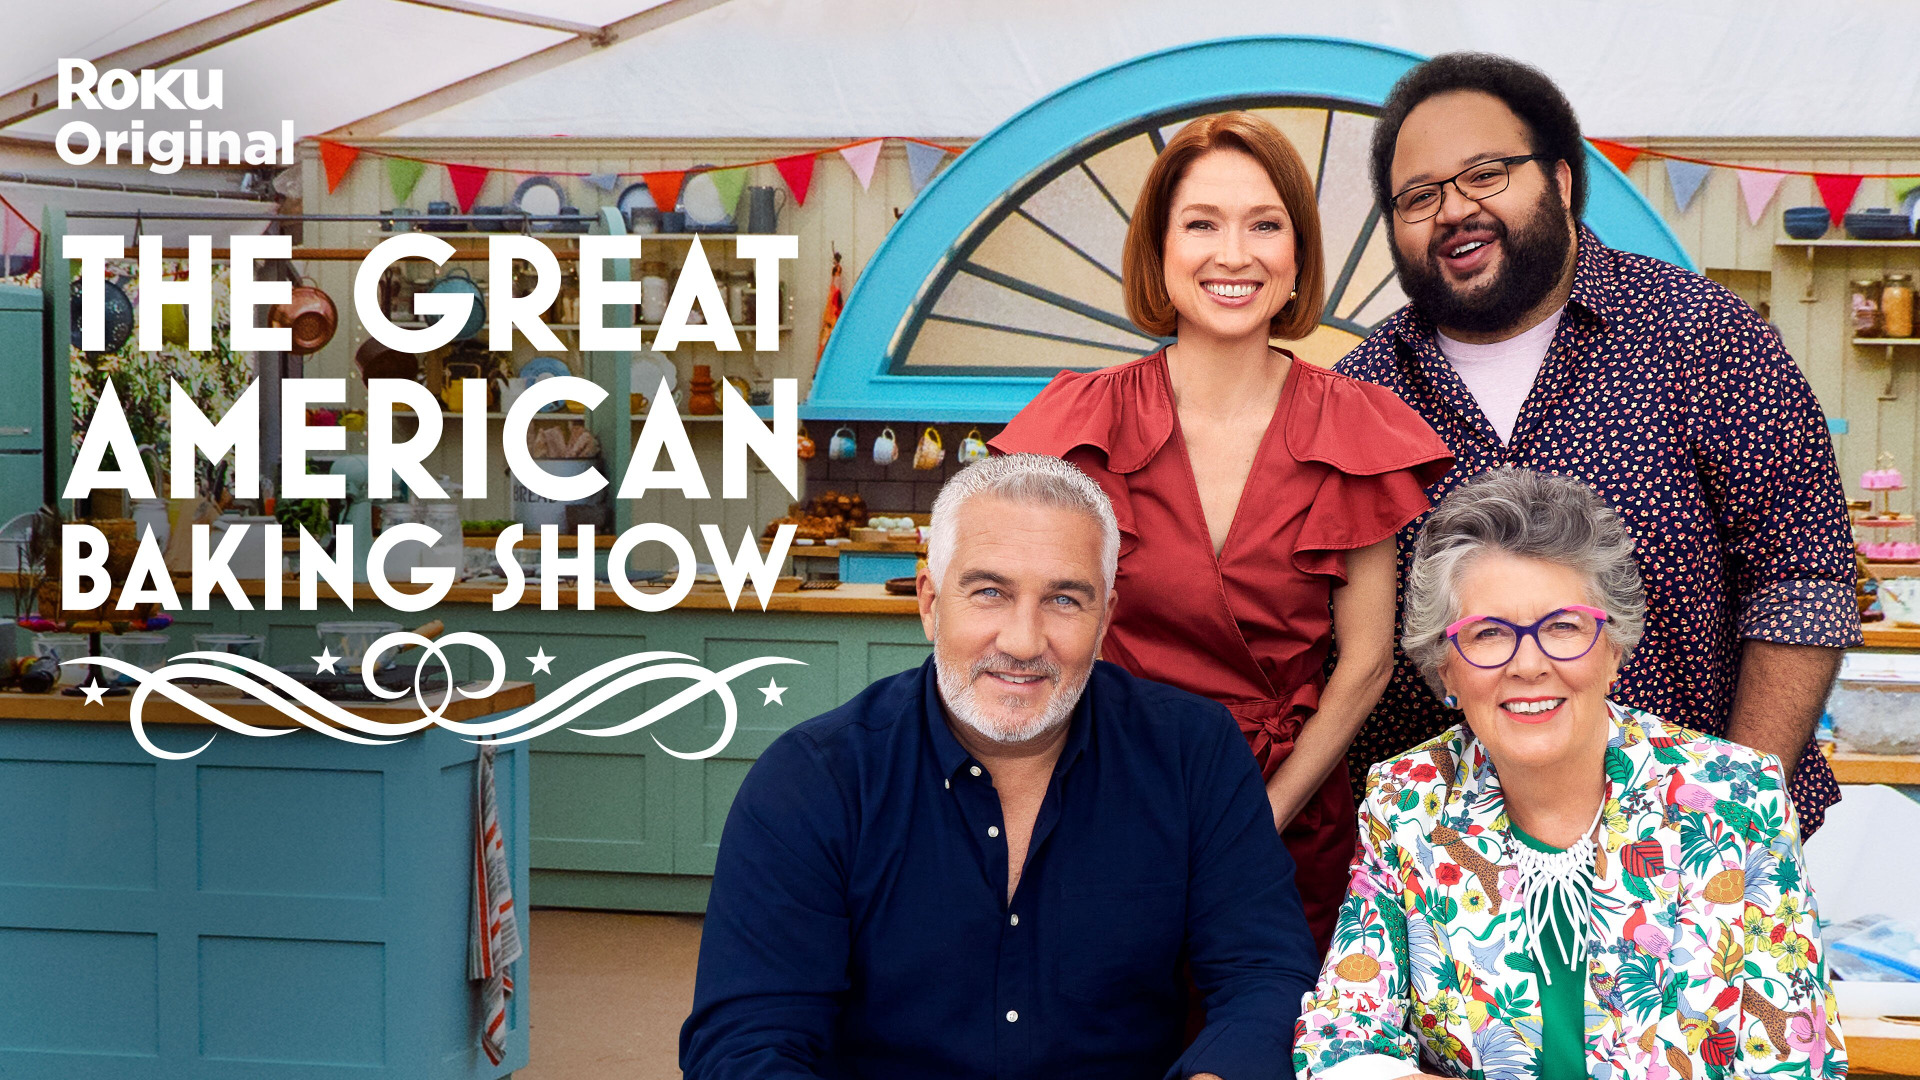 Show The Great American Baking Show